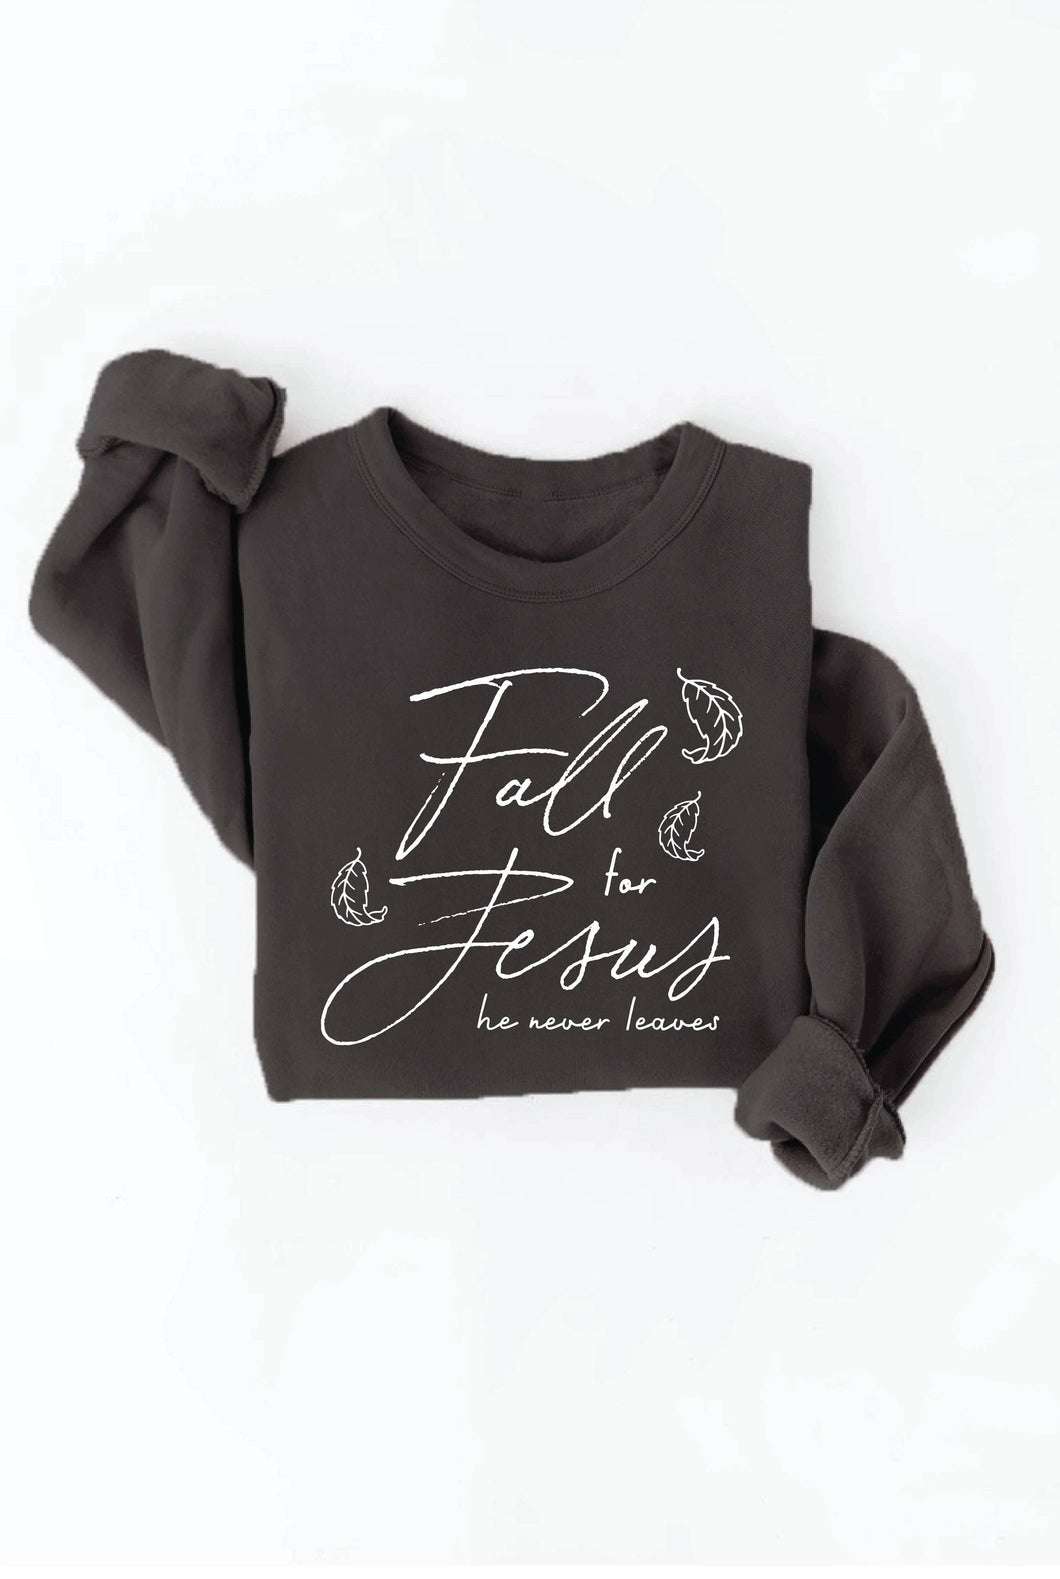 Black FALL FOR JESUS HE NEVER LEAVES Graphic Sweatshirt